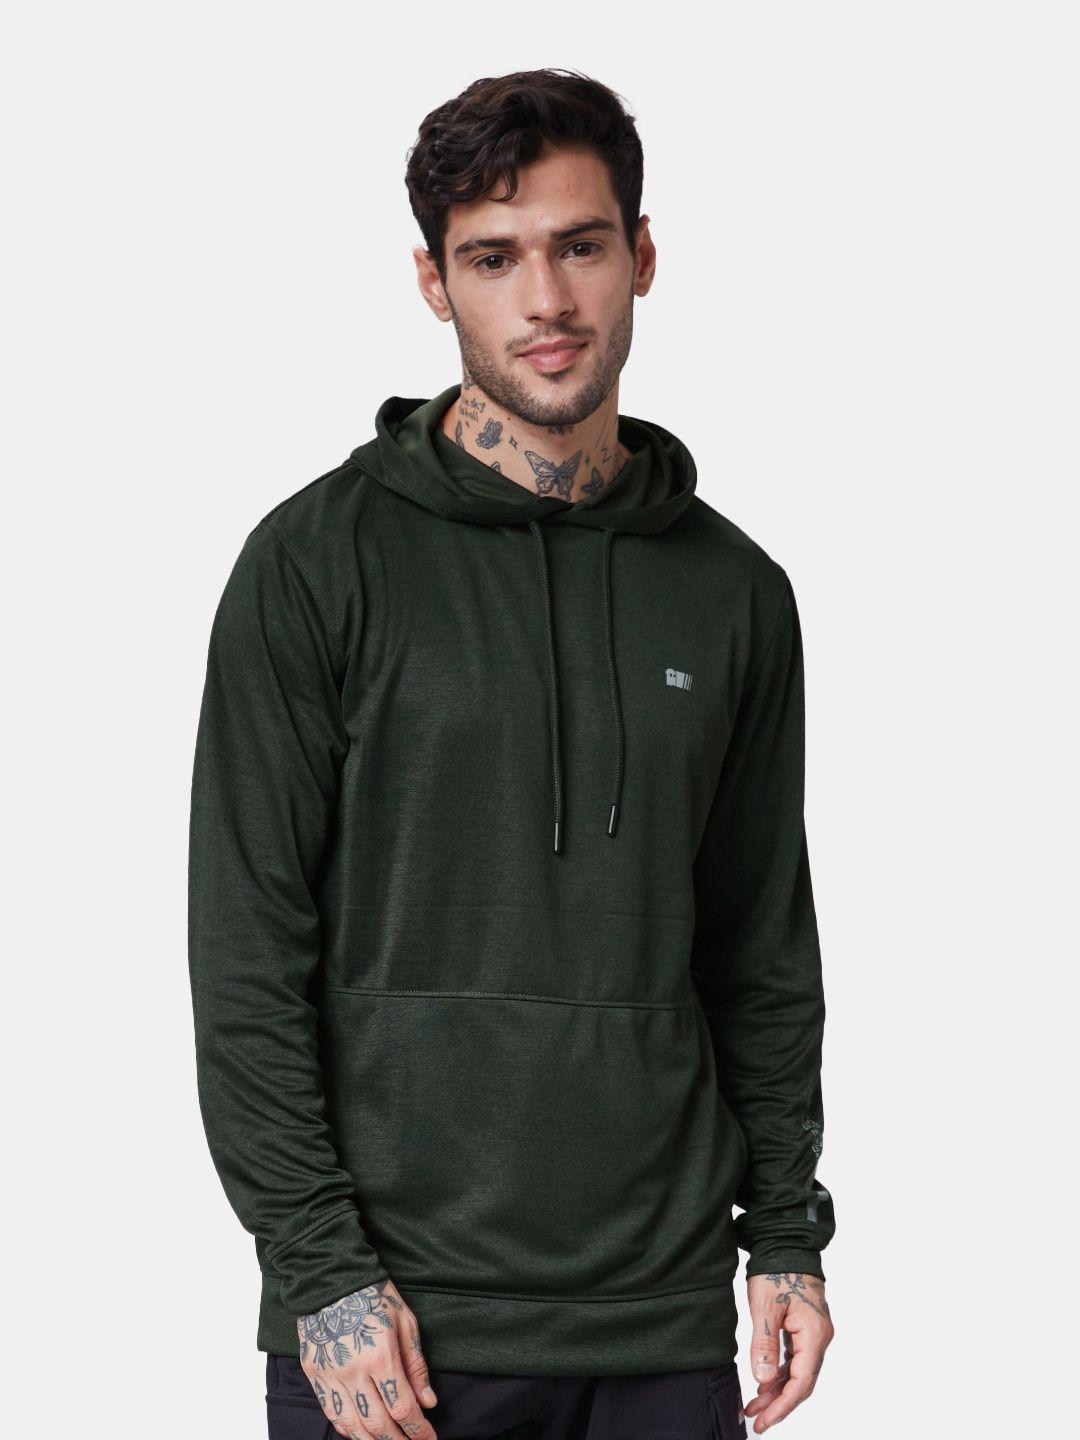 the-souled-store-hooded-pullover-sweatshirt